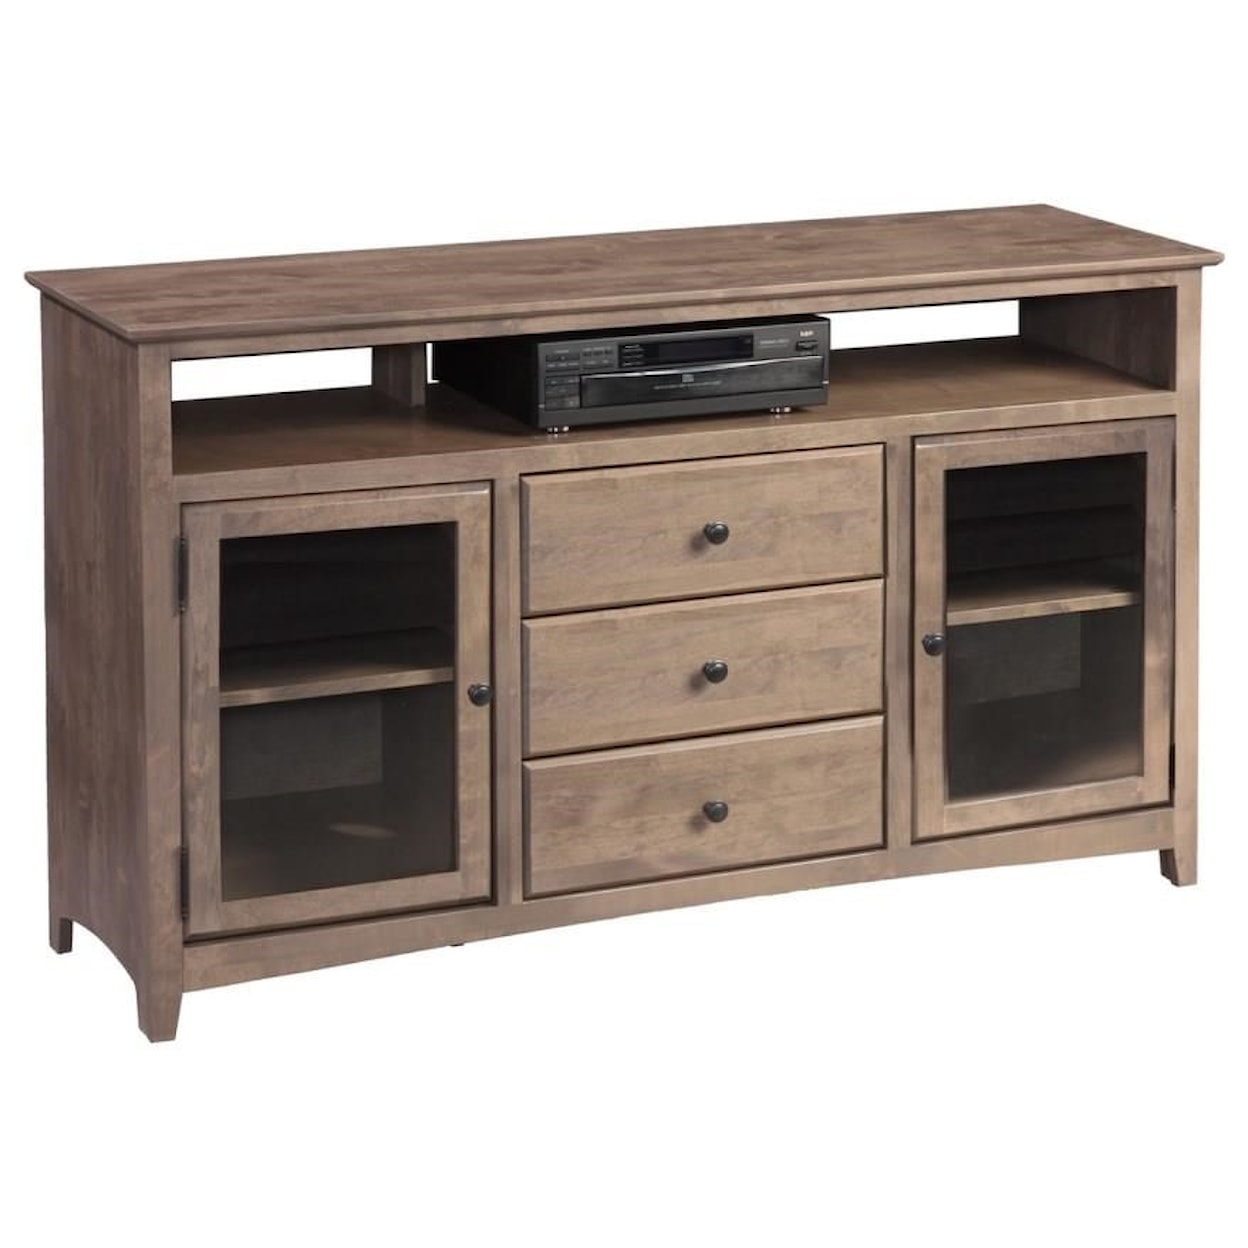 Archbold Furniture Home Entertainment 62" Console - Tall